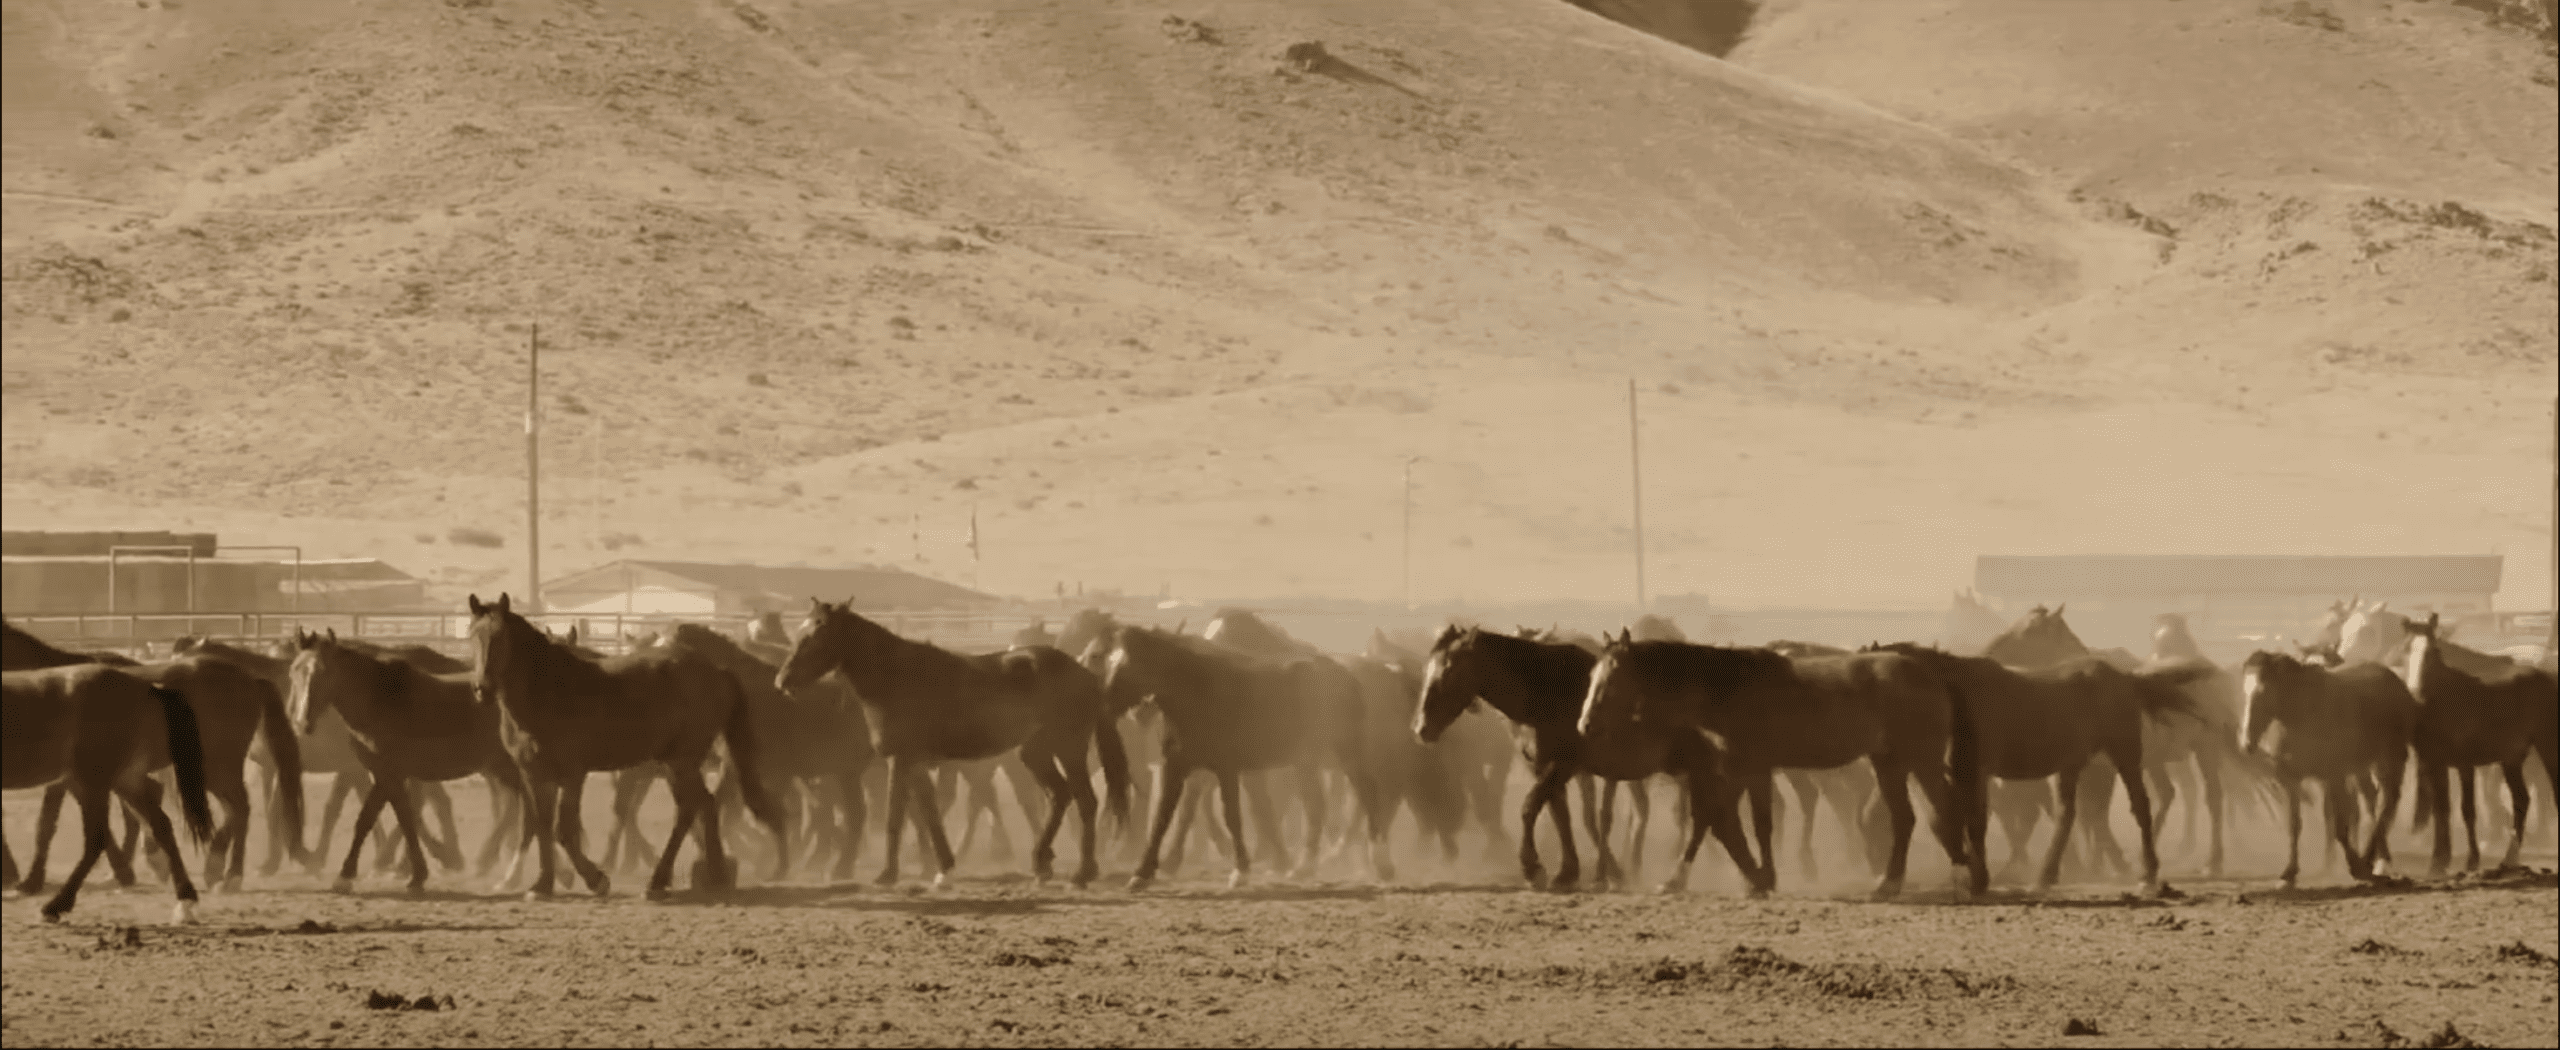 Hundreds of wild horses are confined to a dry, hazardous pen in a holding facility.